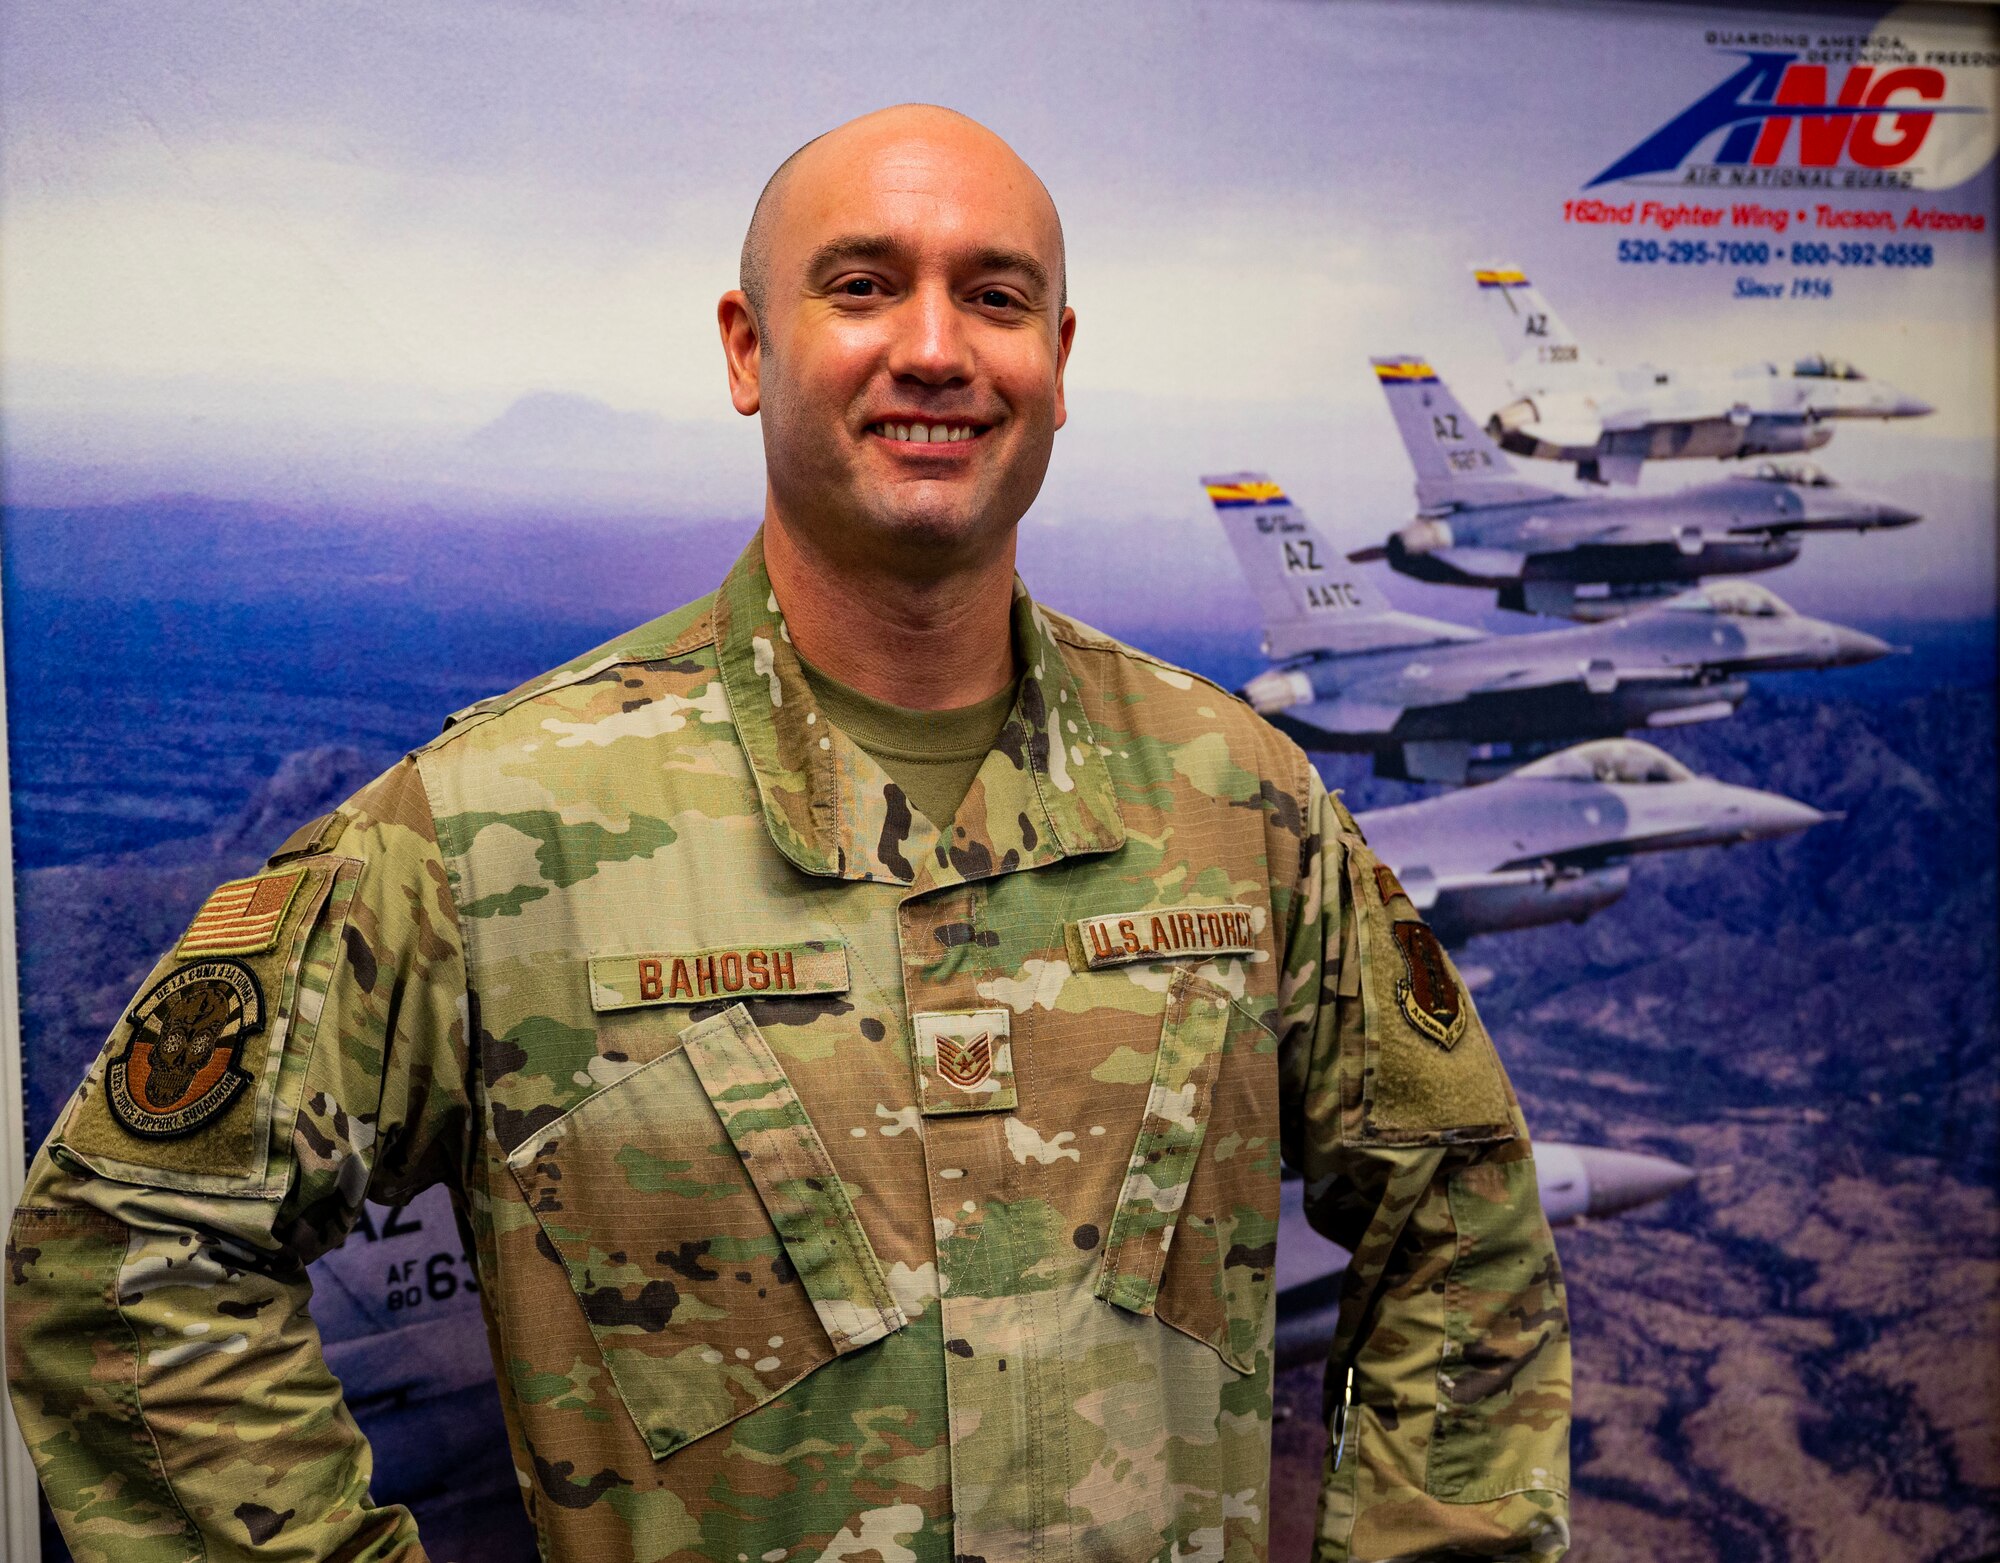 Technical Sgt. Matt Bahosh, an Air National Guard recruiter for the 162nd Wing in Tucson, Arizona, poses for a portrait in front of a recruiting poster in the Arizona Air National Guard recruiting office, Tucson, Ariz. (U.S. Air National Guard photo by SSgt Van C. Whatcott)